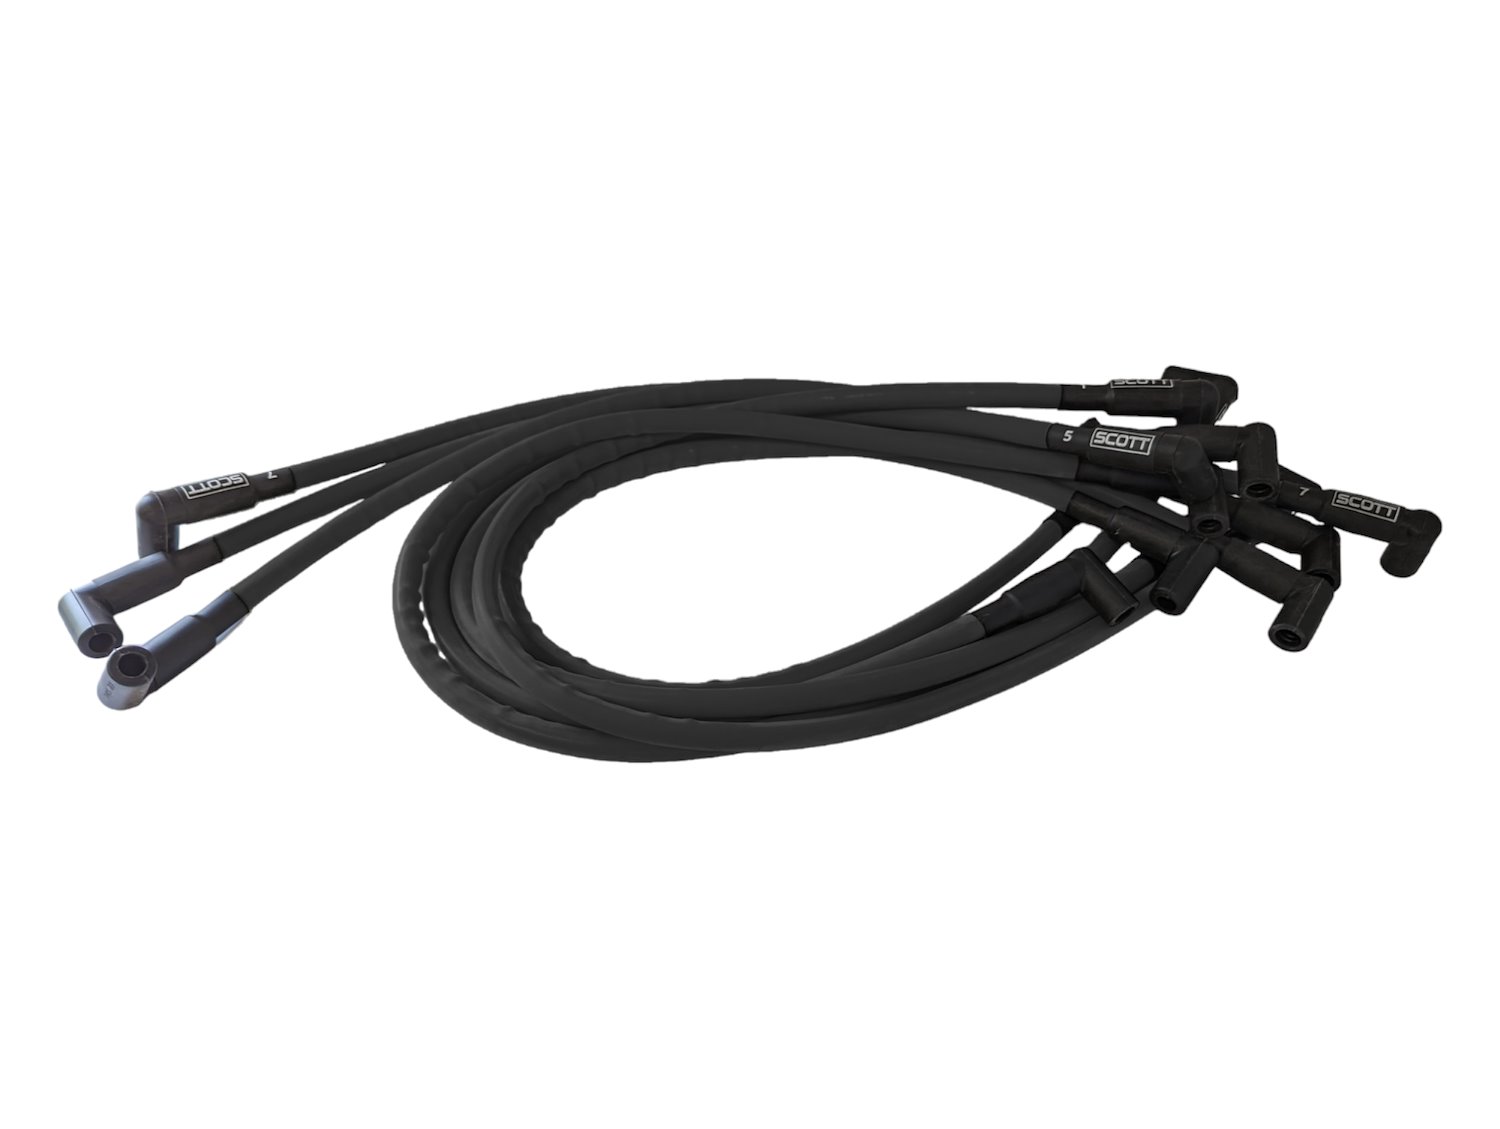 SPW300-CH-435-1 Super Mag Fiberglass-Oversleeved Spark Plug Wire Set for Small Block Chevy, Around Front [Black]